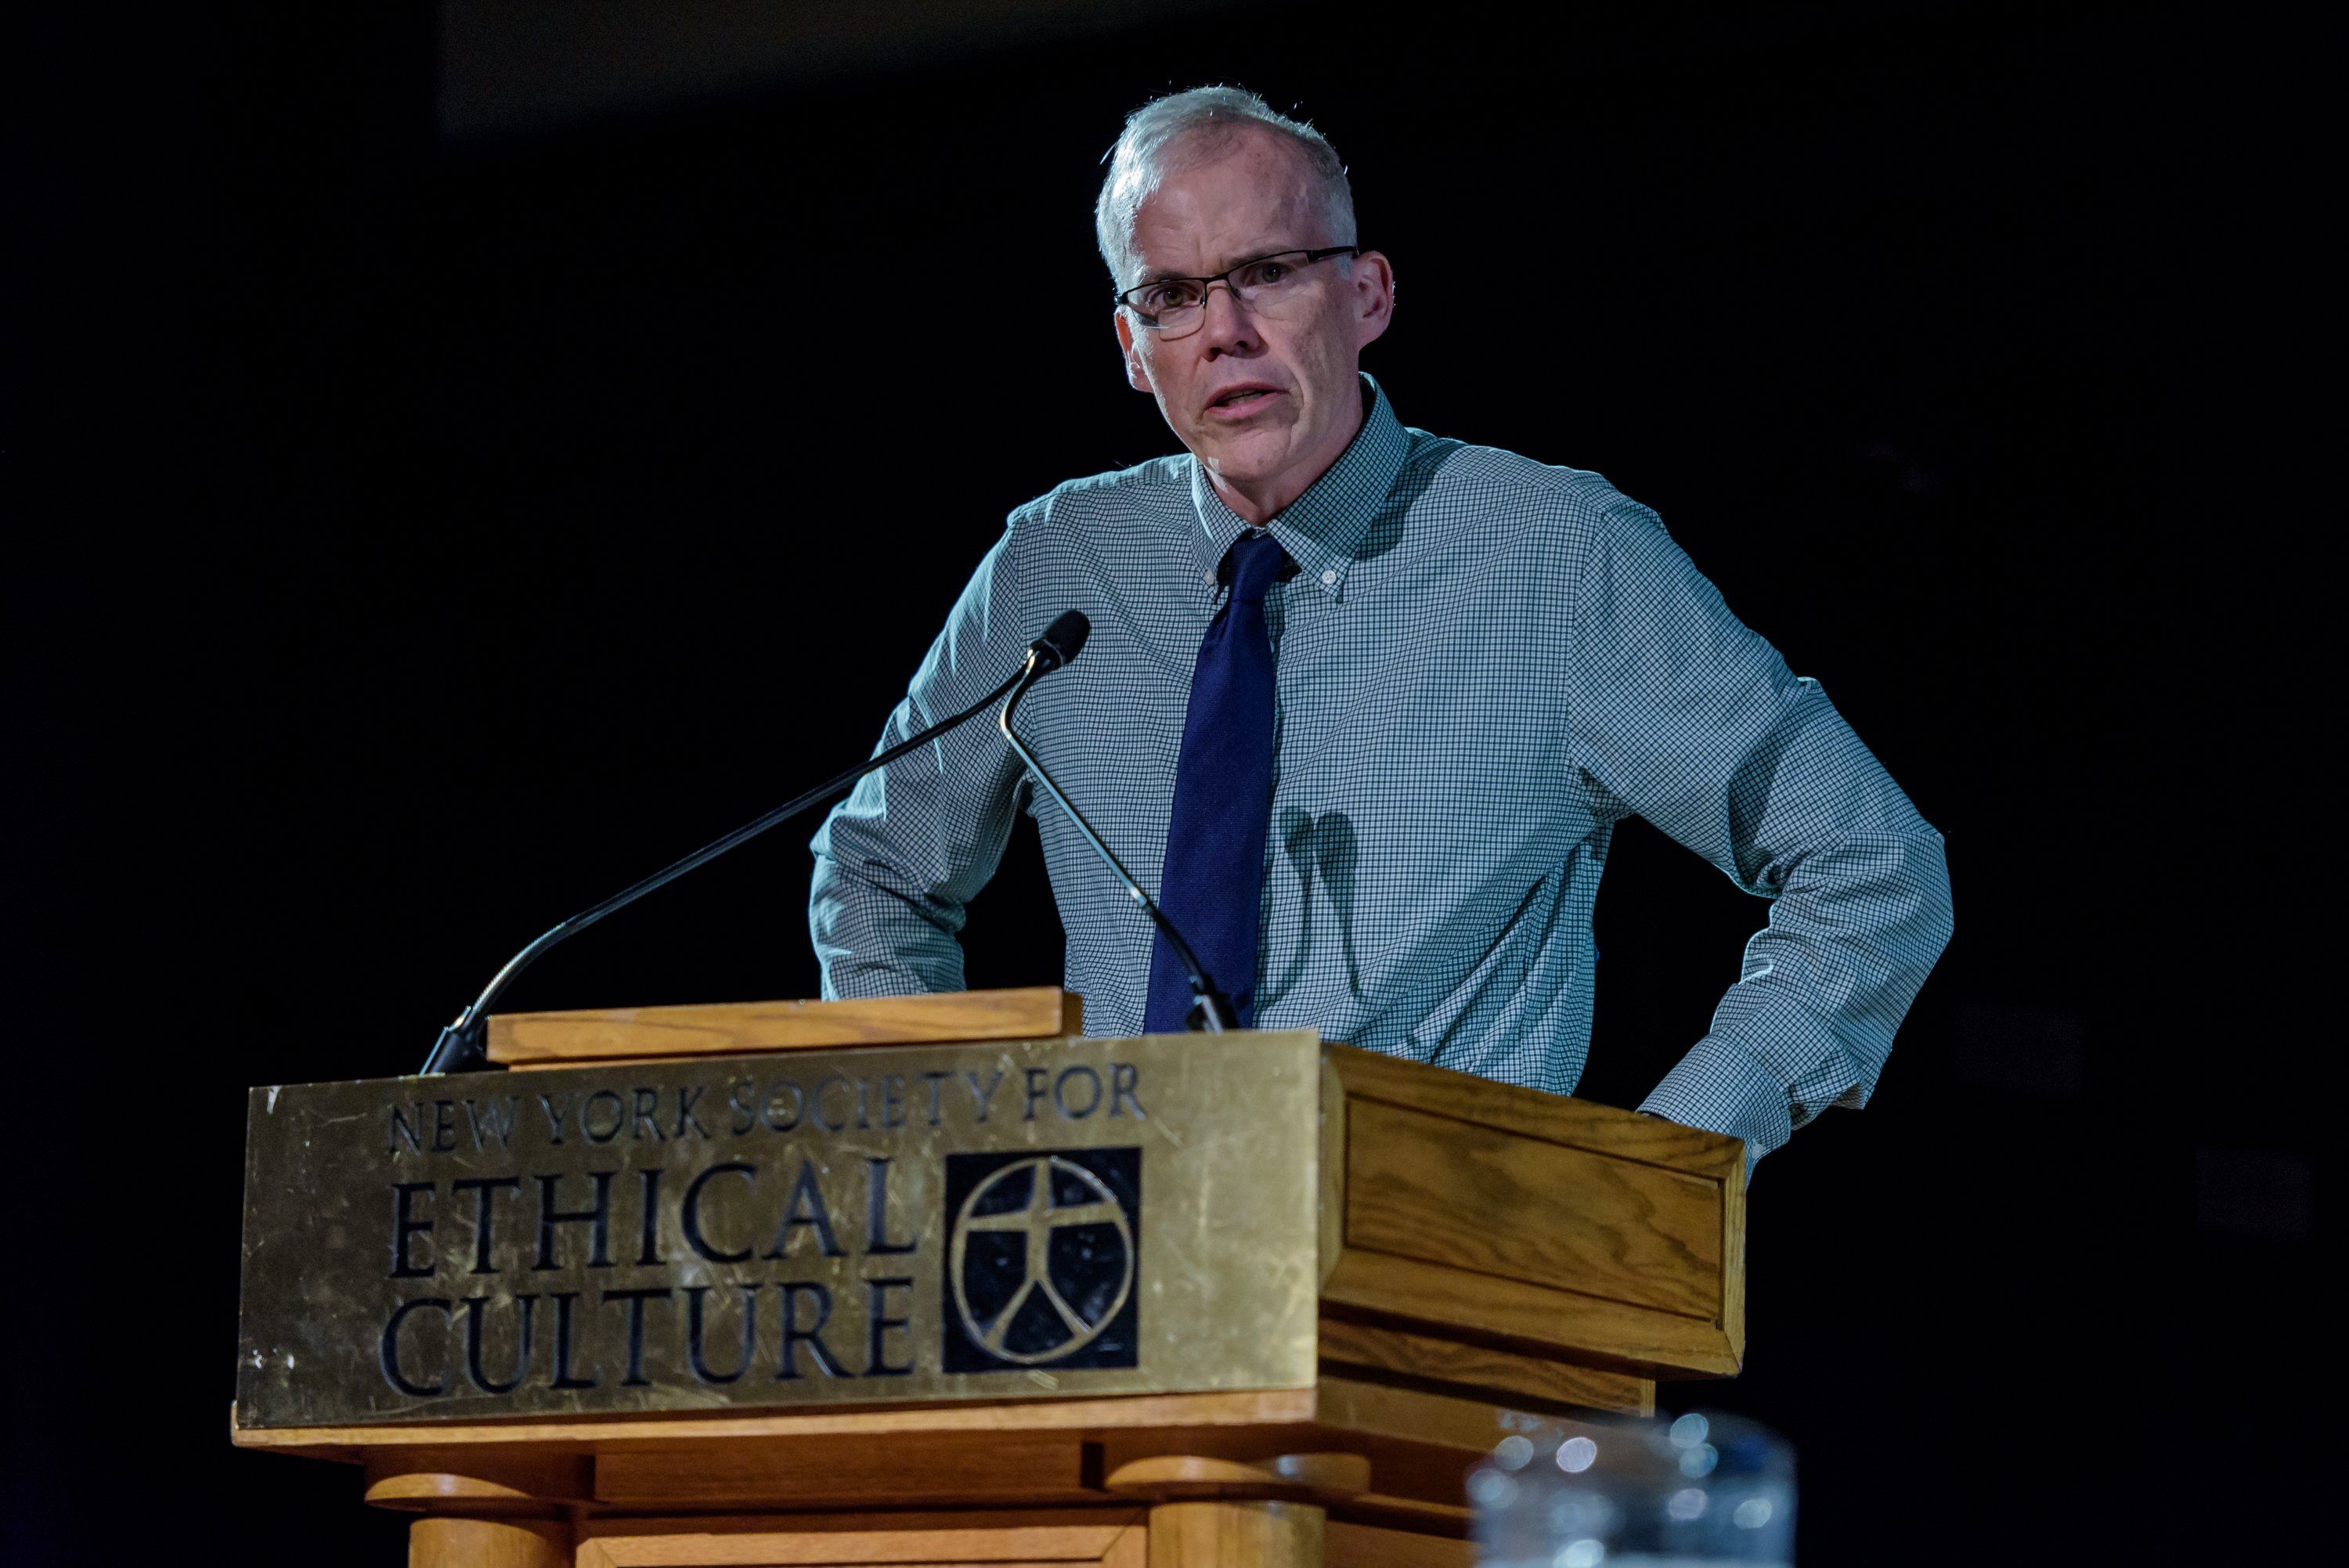 Bill McKibben, founder of 350.org led a panel discussion on